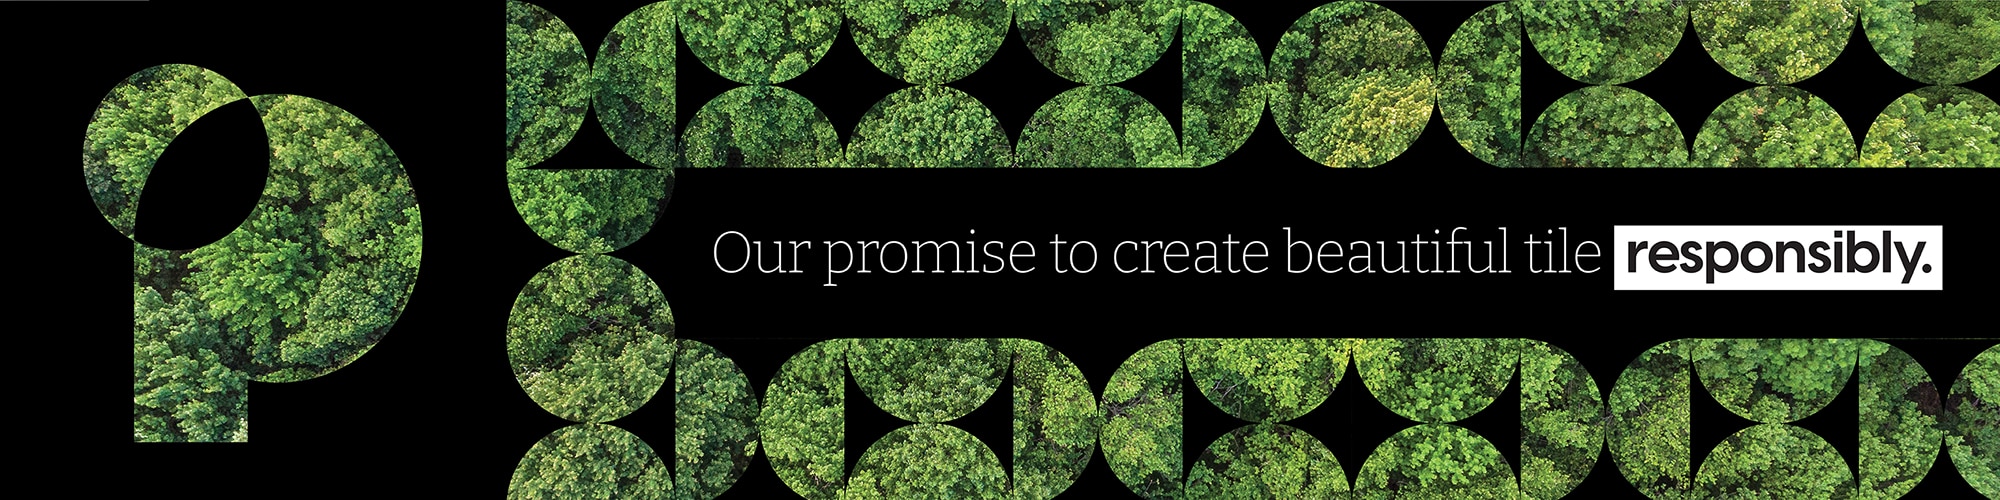 Our promise to create beautiful tile responsibly